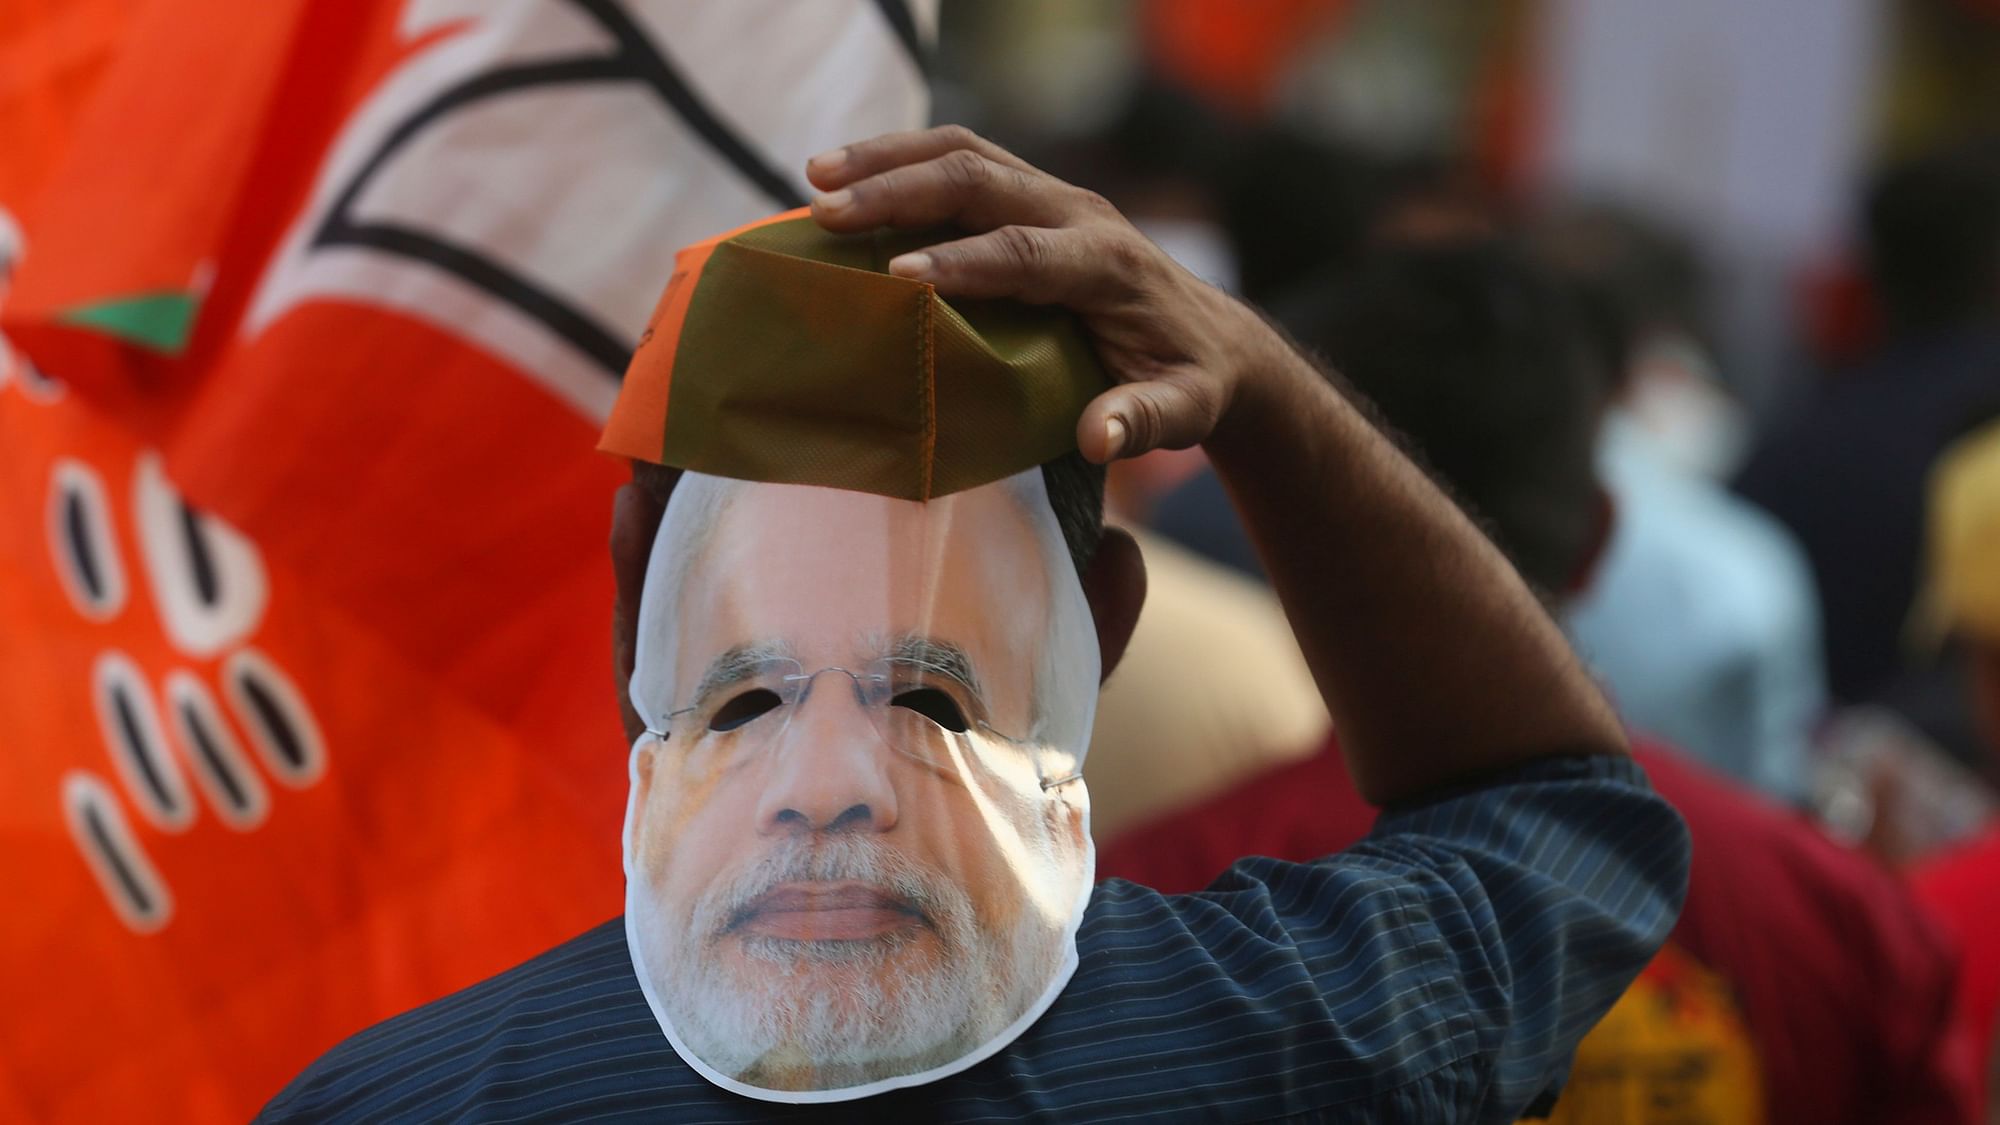 A supporter of Bharatiya Janata Party wearing a mask of Prime Minister Narendra Modi participates in an election campaign rally in Mumbai, India.&nbsp;